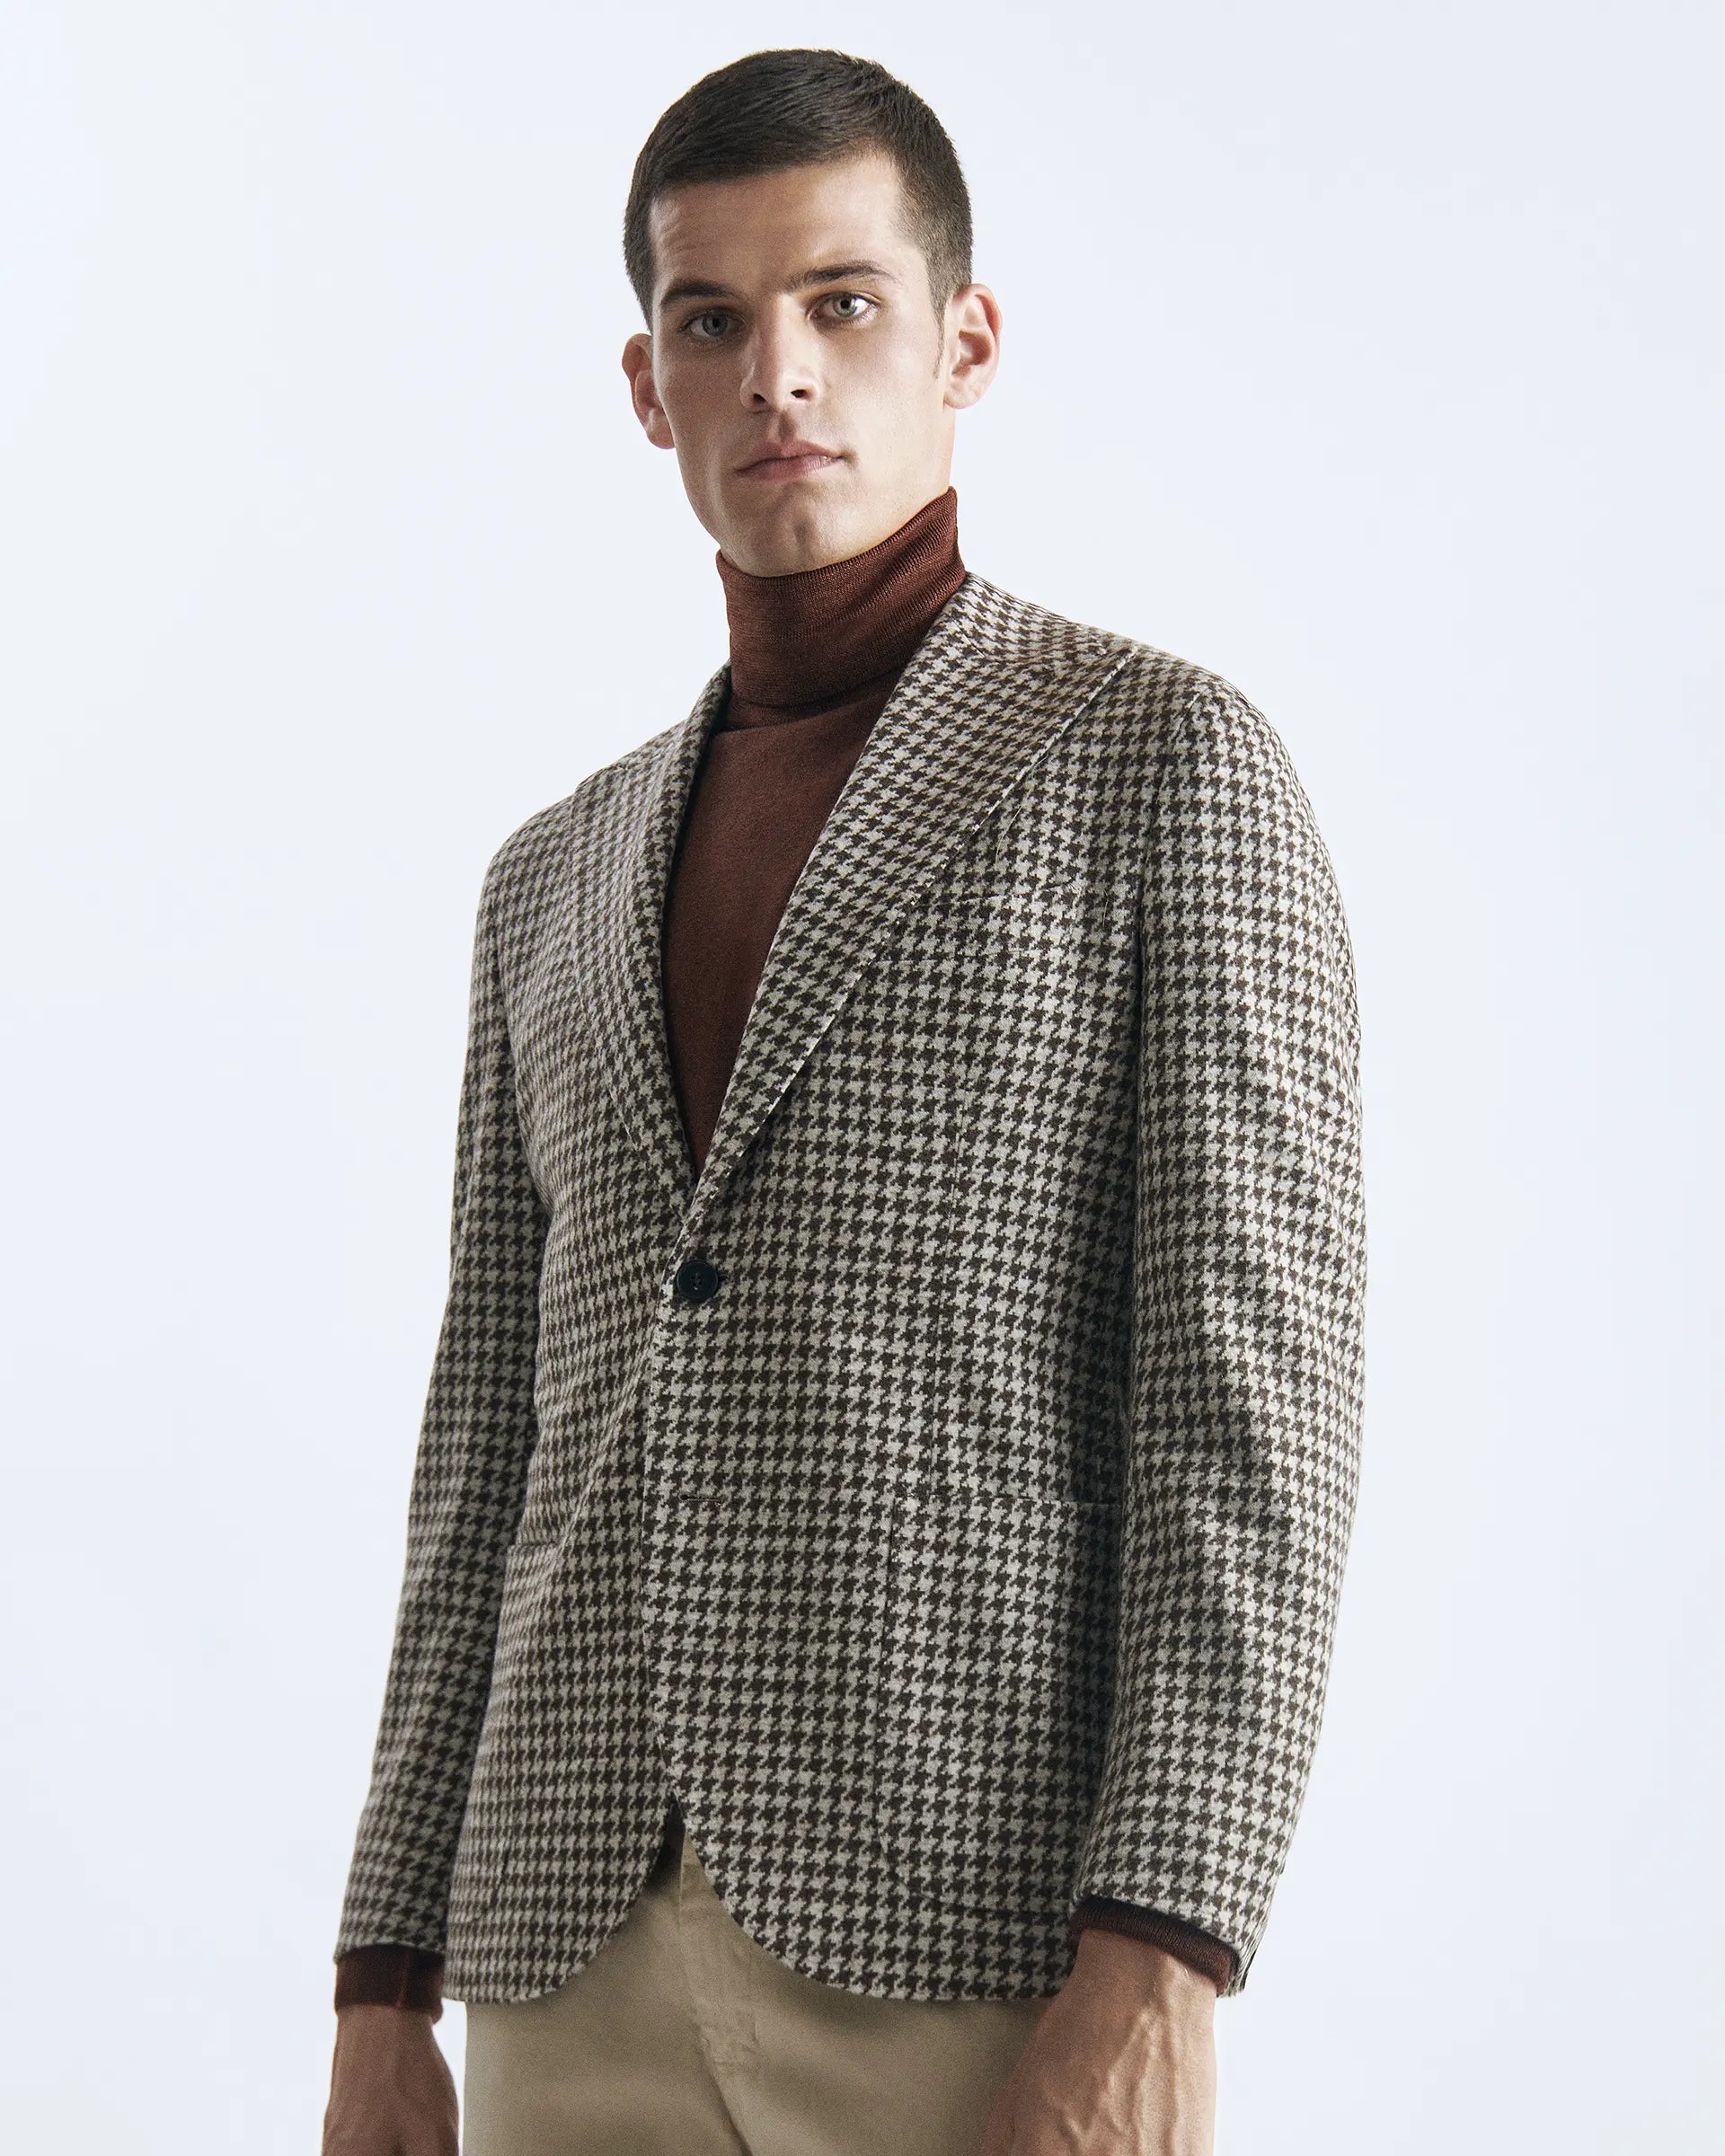 Beige and brown houndstooth jacket in Vitale Barberis &amp; Canonico Supersonic fabric